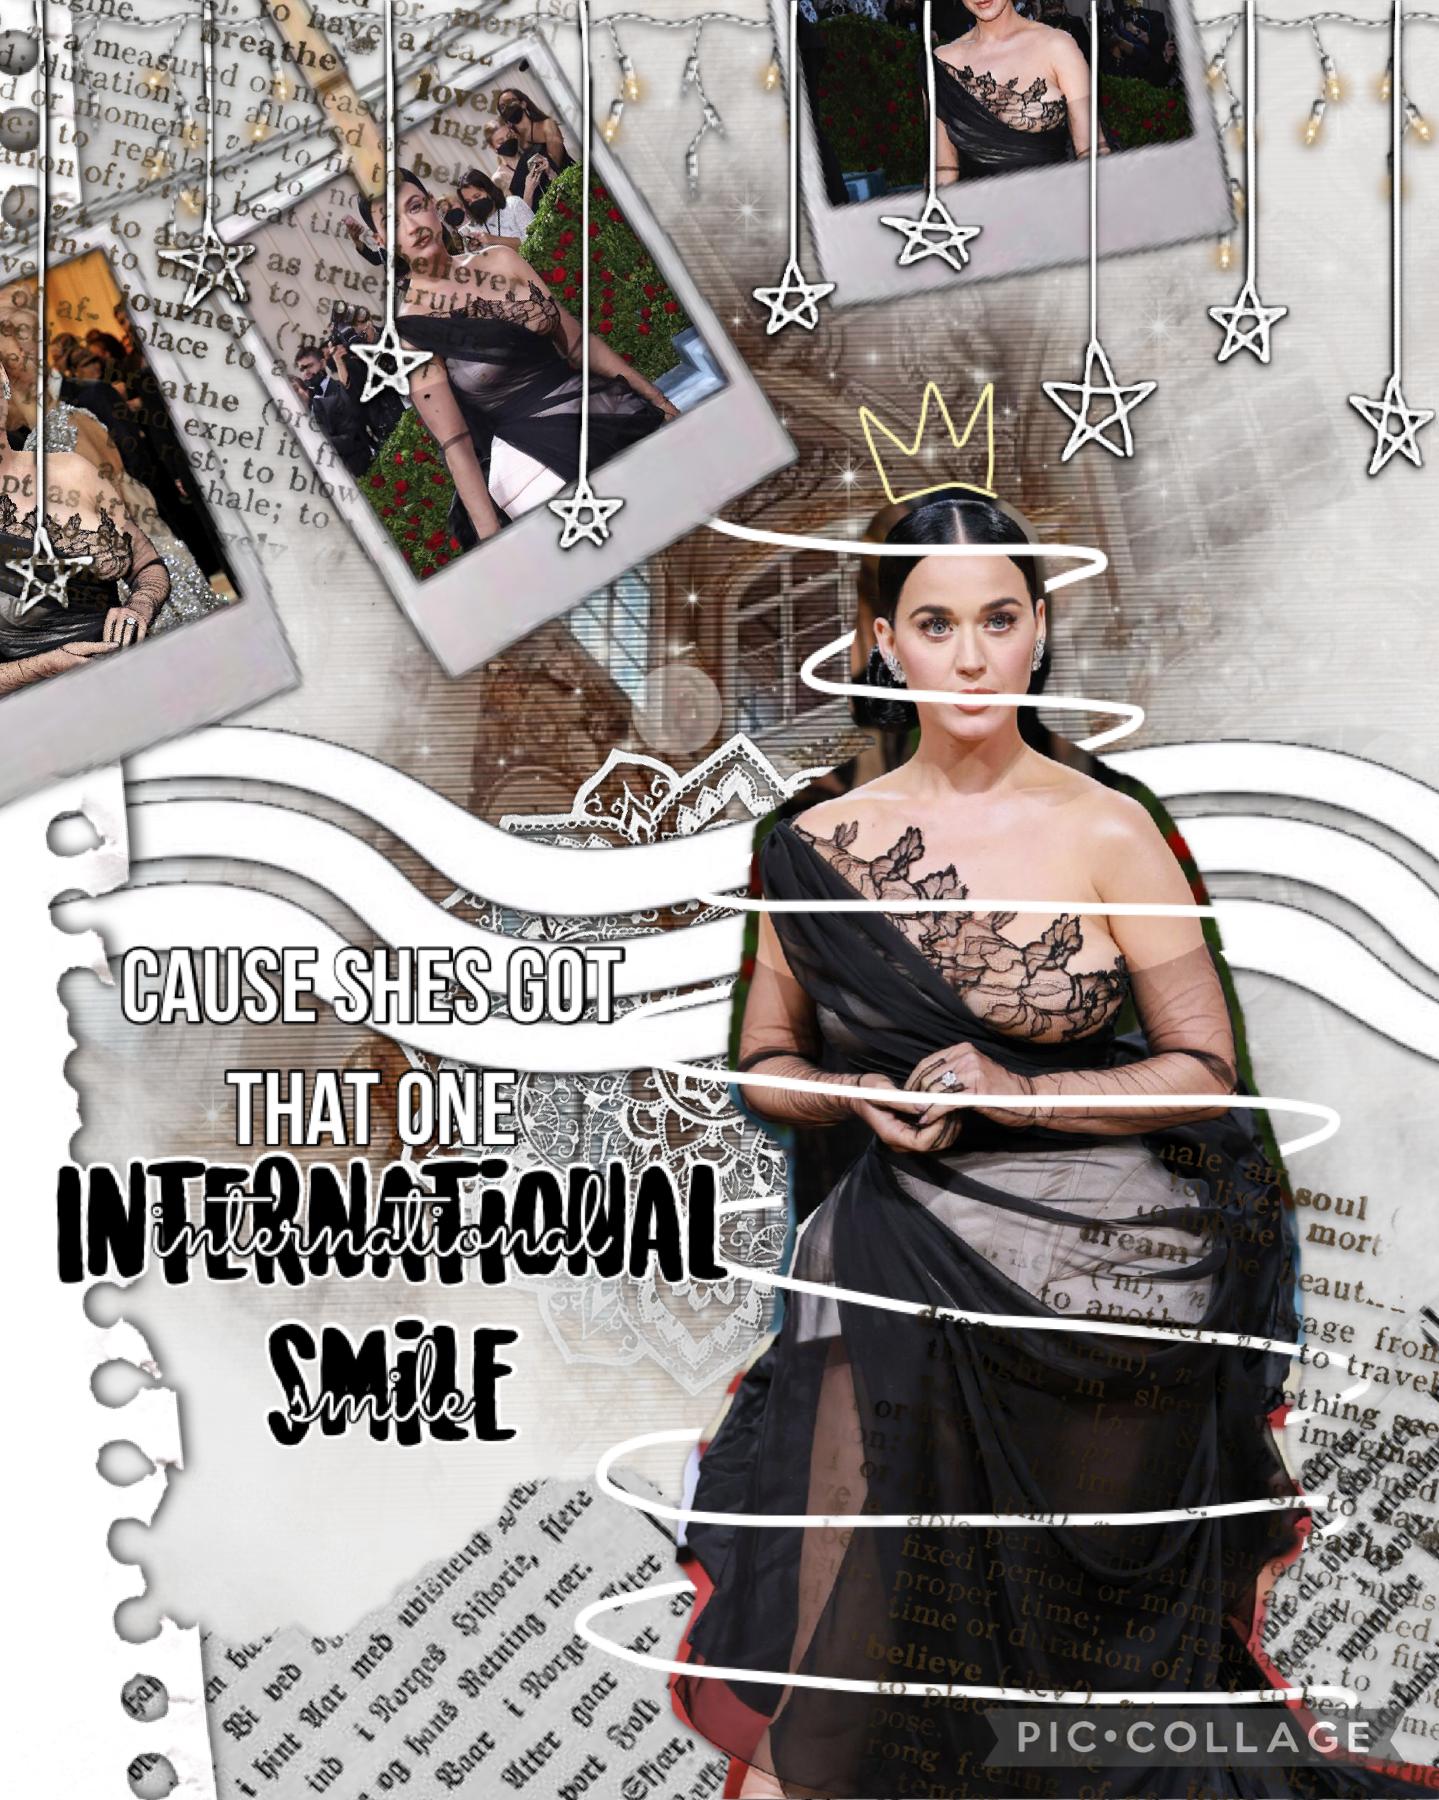 🖤 TAP 🖤
🖤 Katy Perry royalcore aesthetic! 🖤
🖤 Lyrics from Katys song ‘International Smile’ 🖤
🖤 That was her outfit for the met gala 🤩 🖤
🖤 QOTD- Fav Music Artist? 🖤
🖤 AOTD- Katy Perry, Cavetown, chloe moriondo 😃 🖤